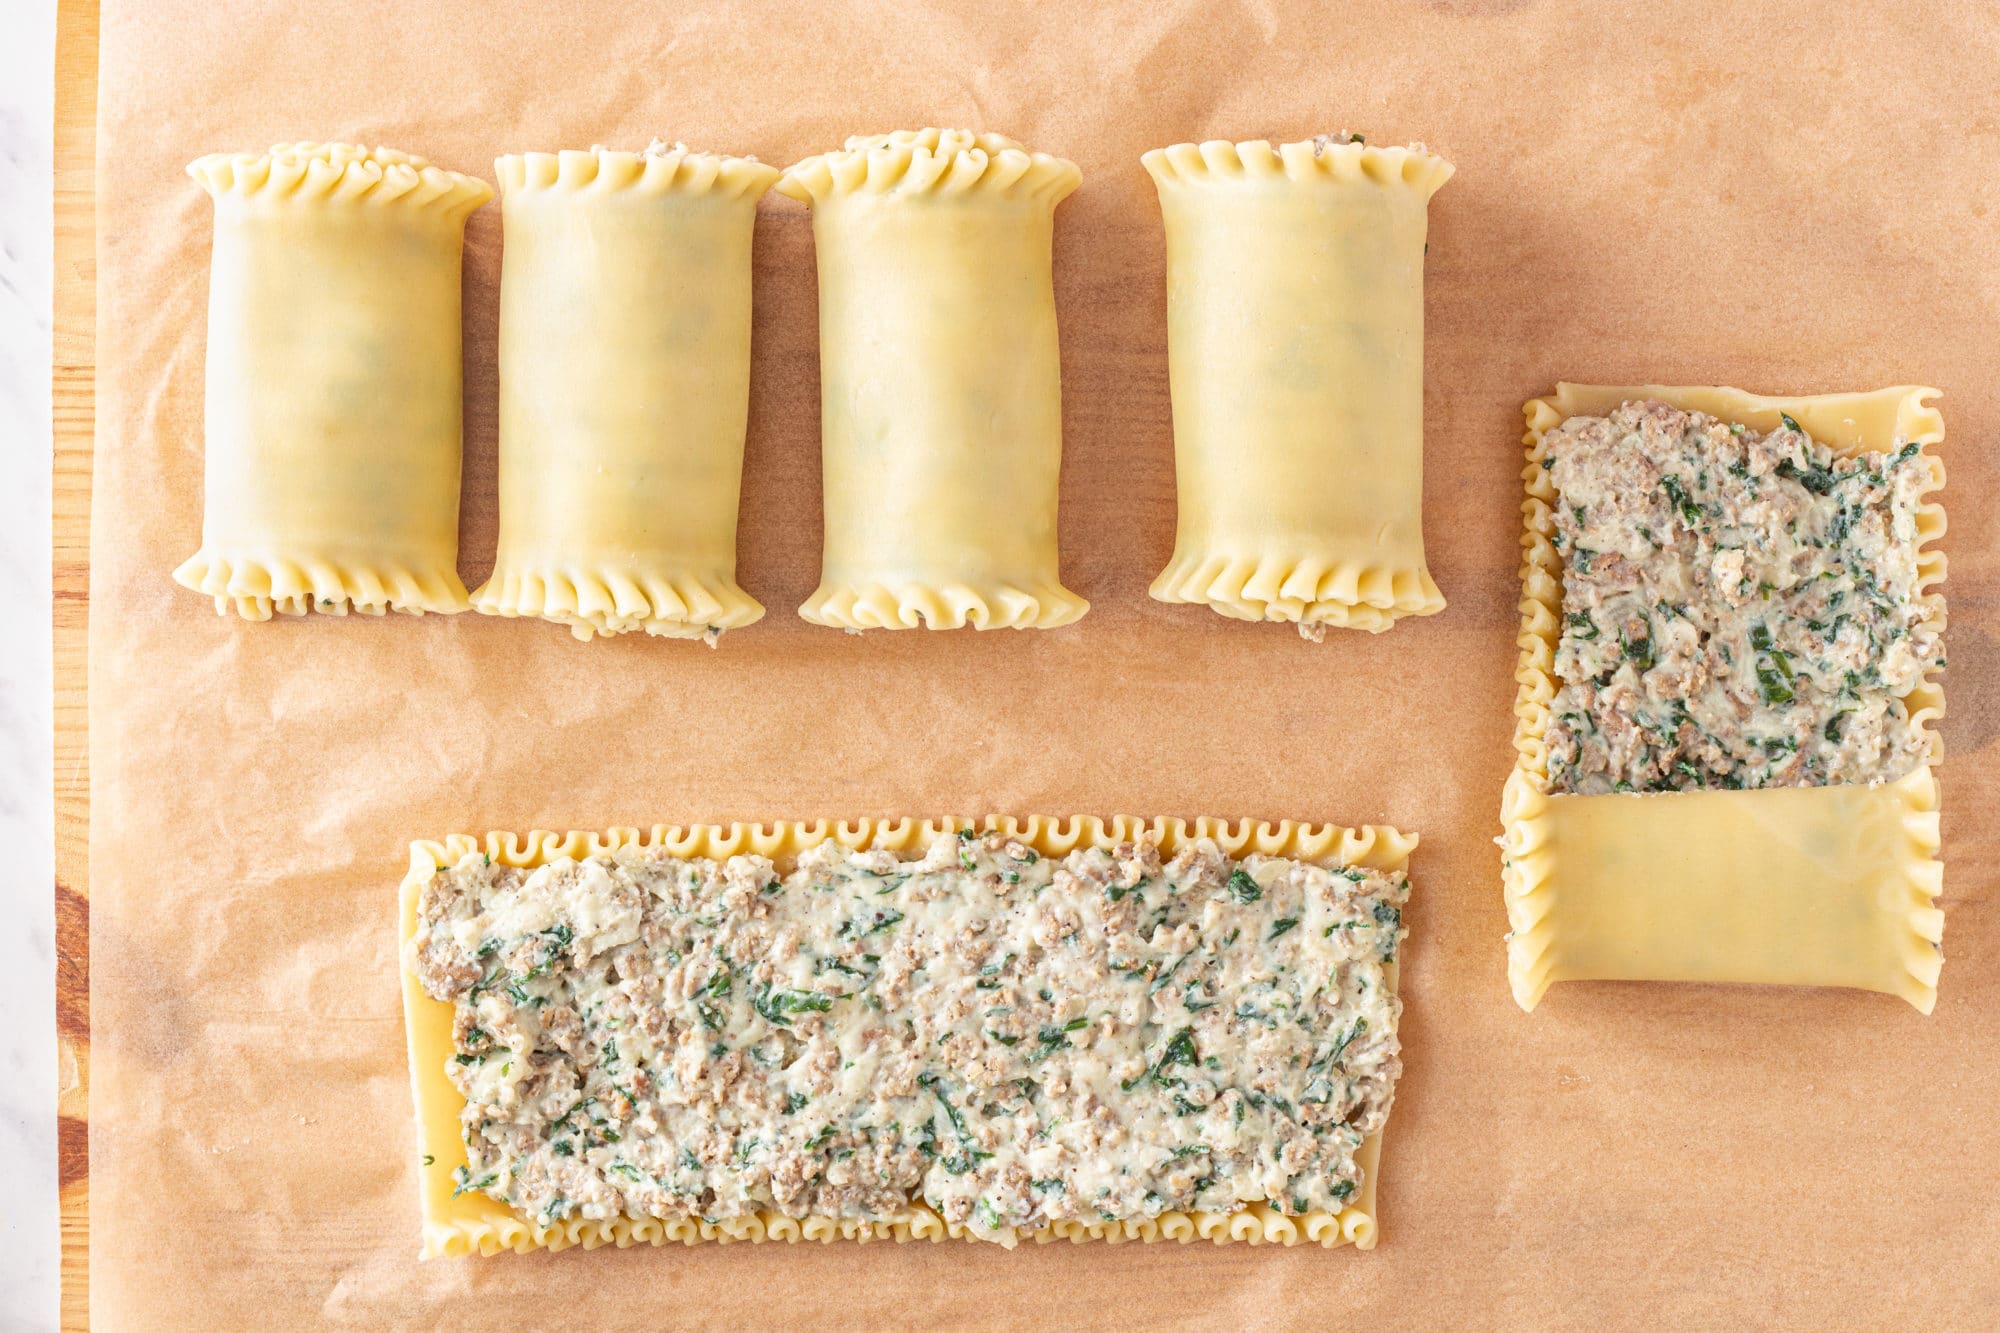 lasagna-pasta-being-rolled-with-meat-filling-inside-on-parchment-paper